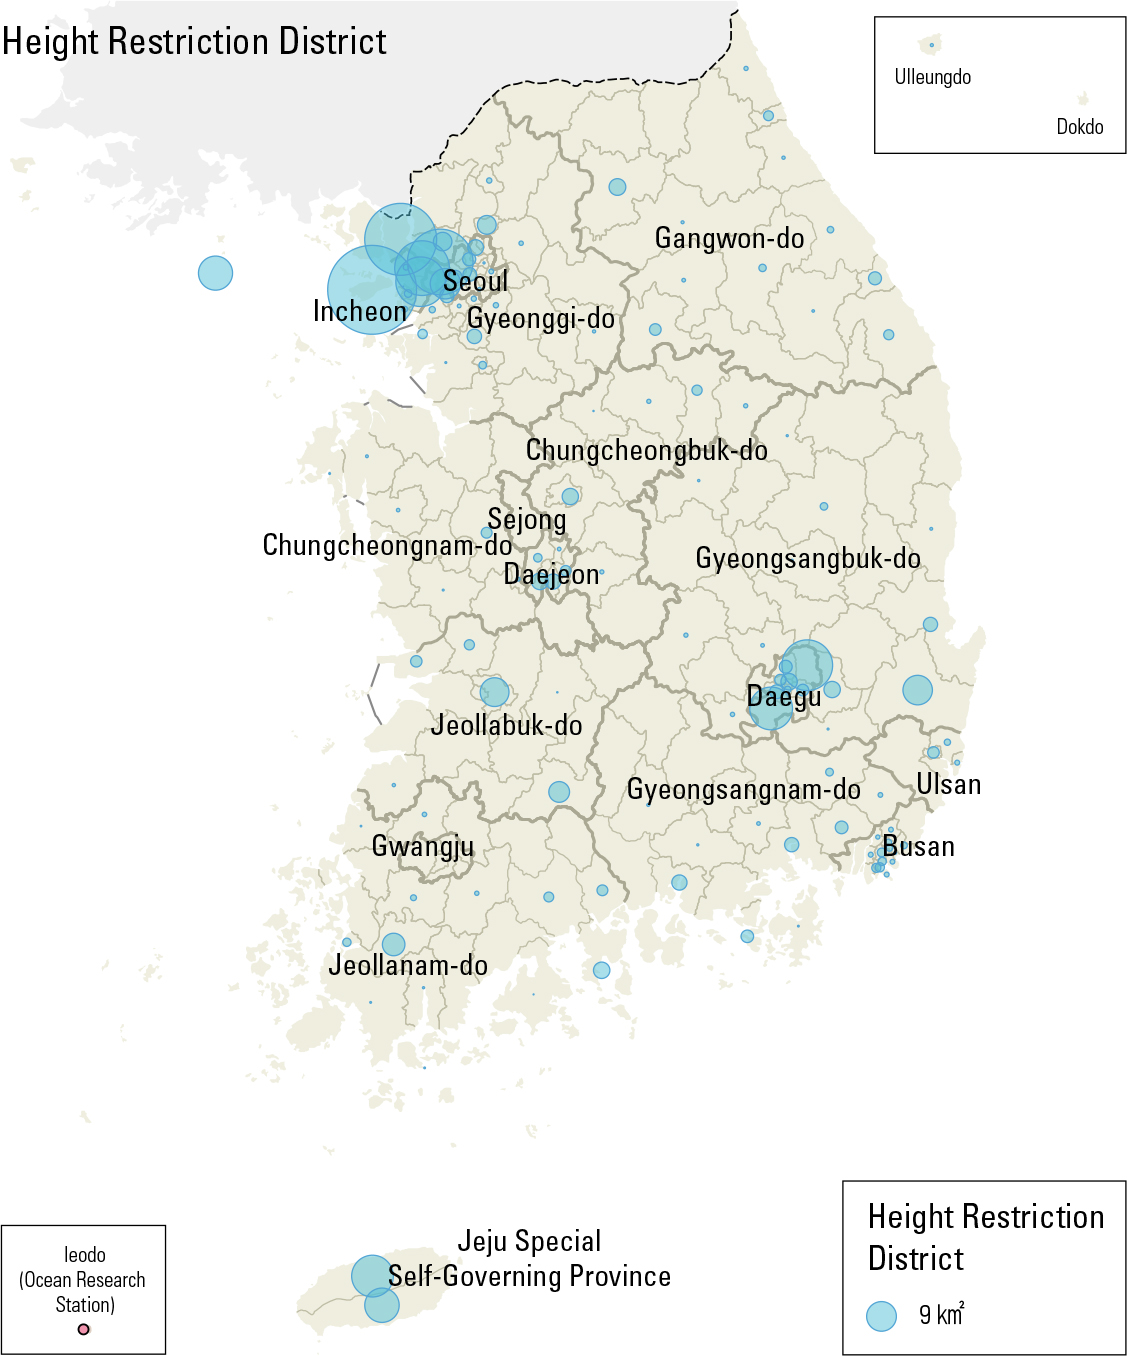 Area of Special Districts by -Si, -Gun, and -Gu (2014)